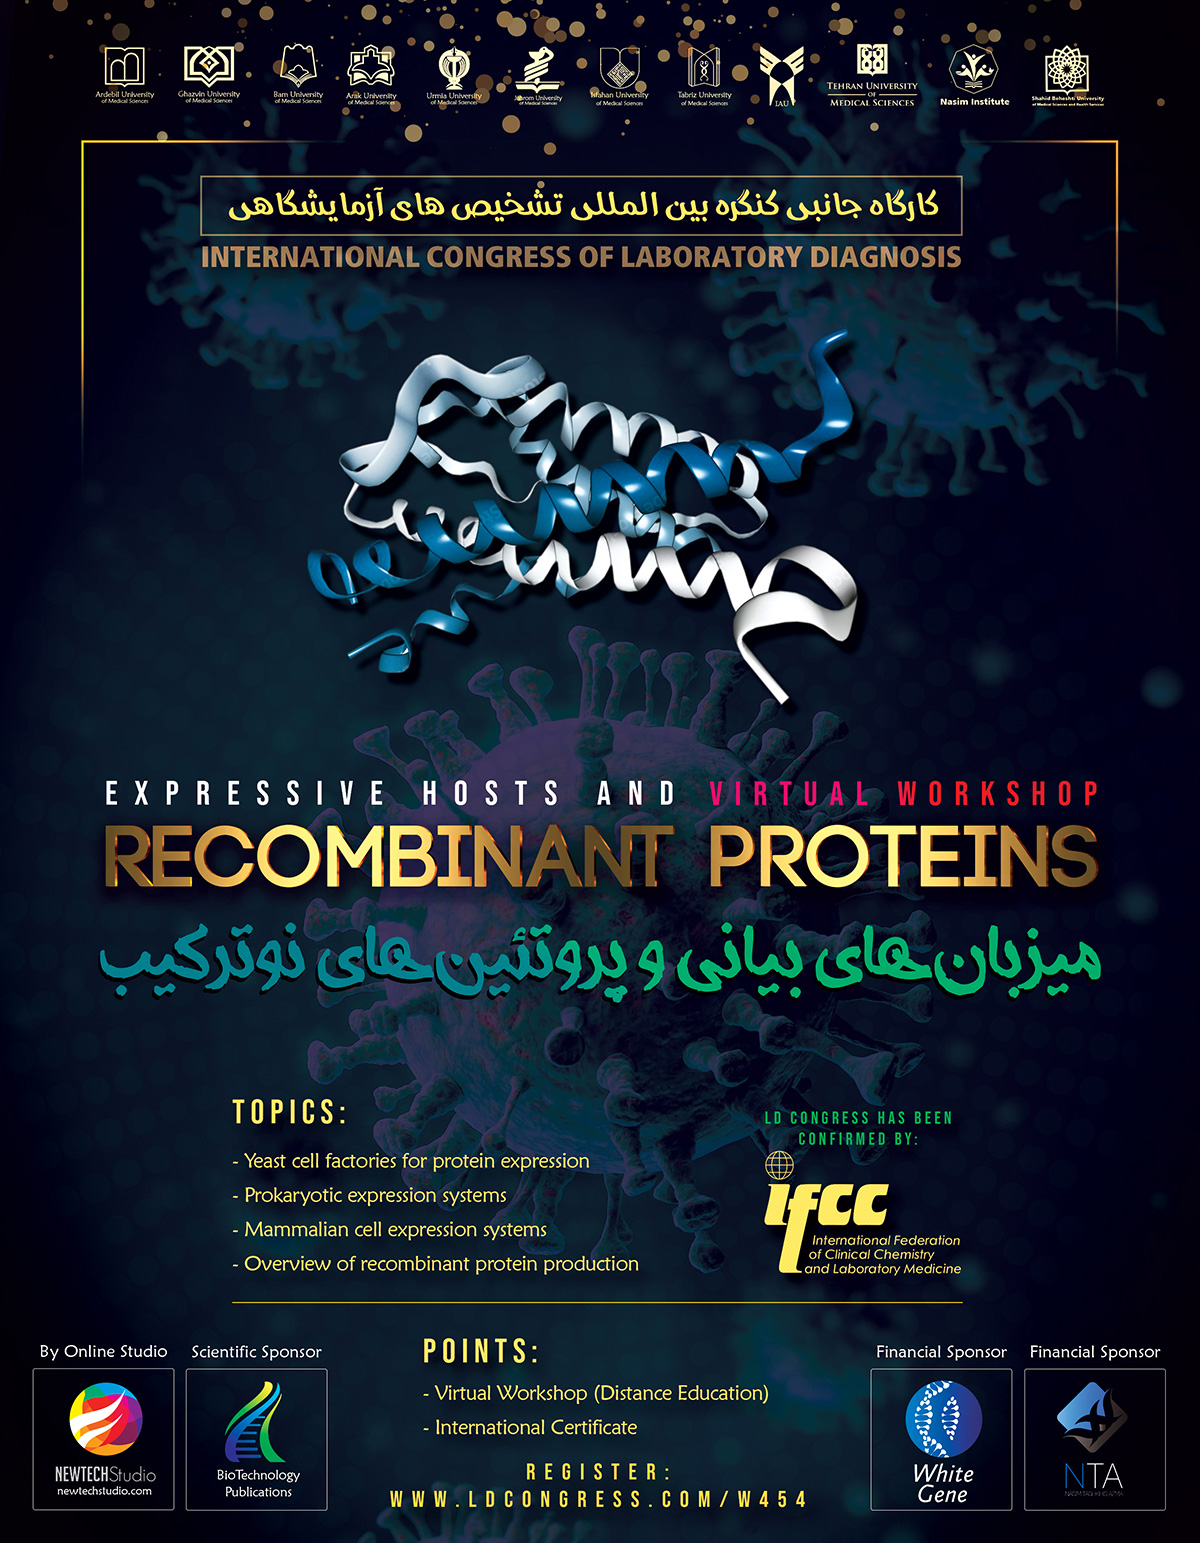 Theoretical and practical aspects of recombinant protein expression systems